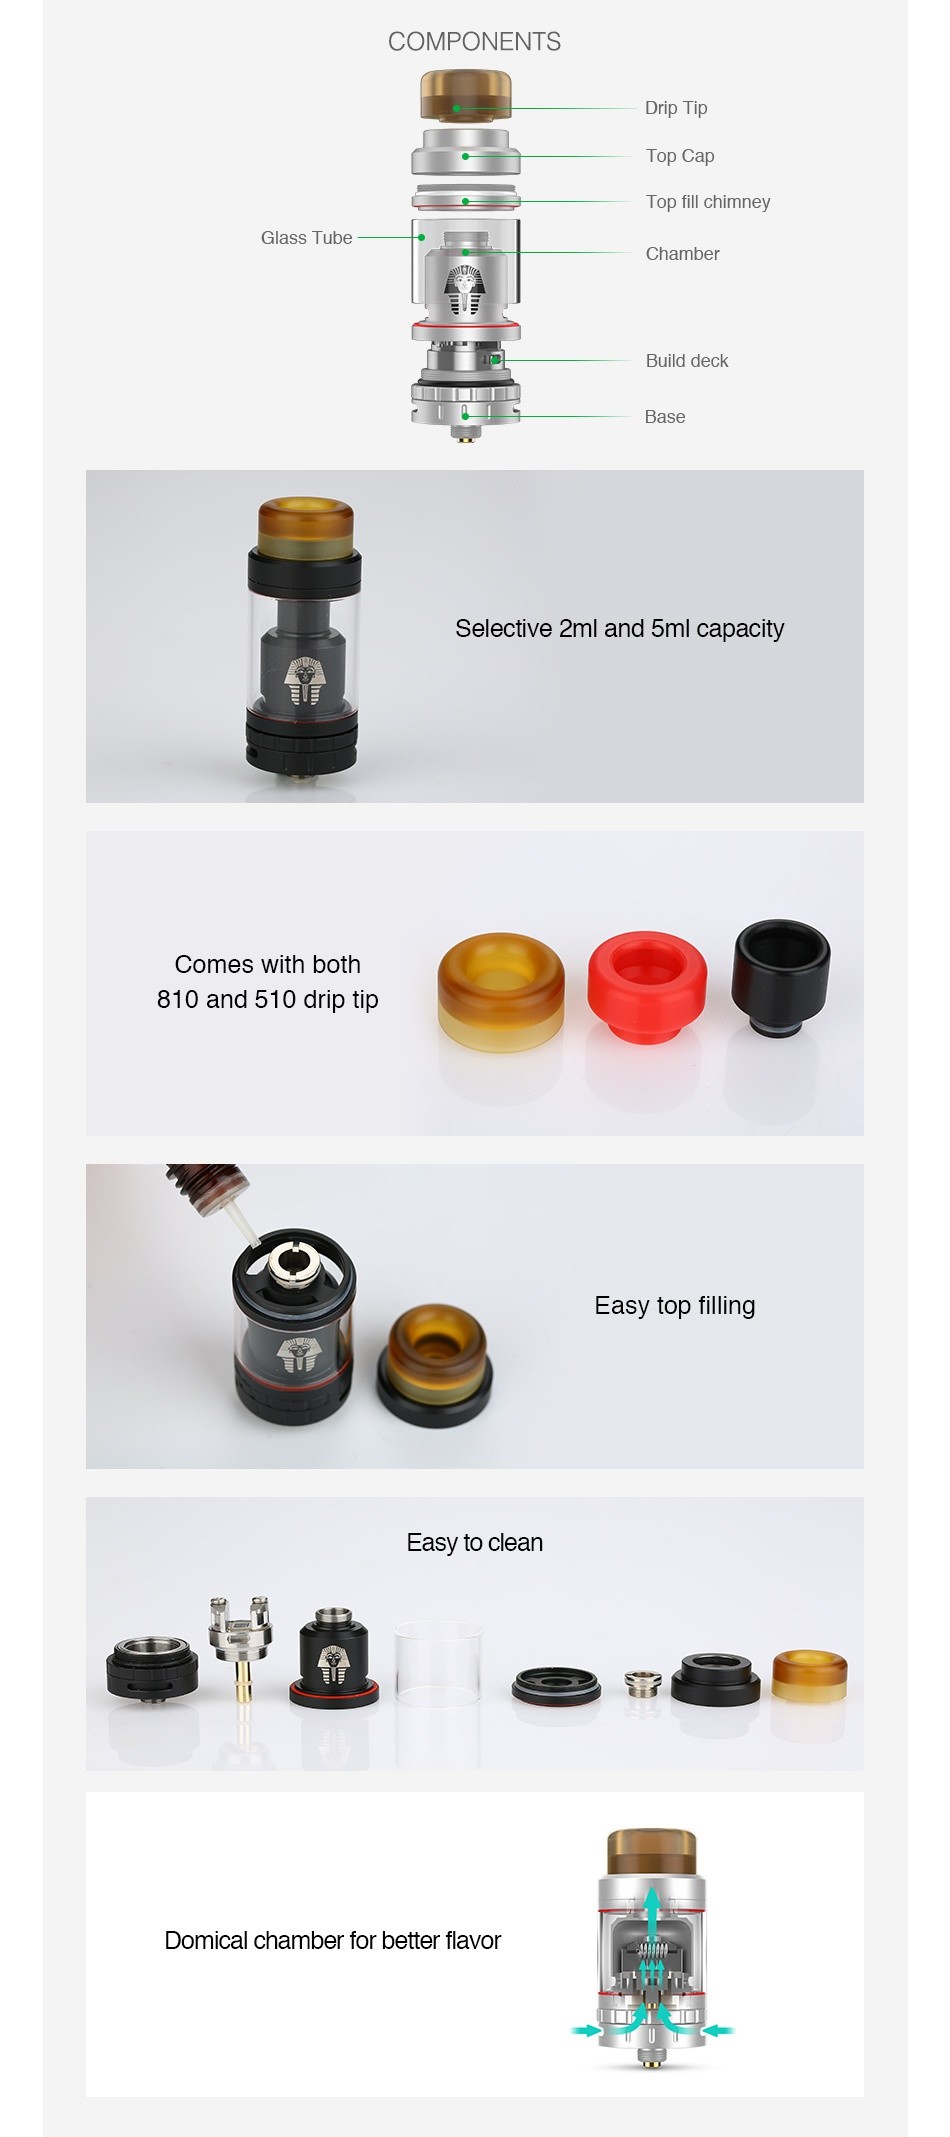 Digiflavor Pharaoh Mini RTA 2ml COMPONENTS Drip Tip Top Cap Top fill chi Glass Tube Chamber Build deck Base Selective 2ml and 5ml capacity Comes with both 810 and 510 drip tip Easy top filling Easy to clean Domical chamber for better flavor